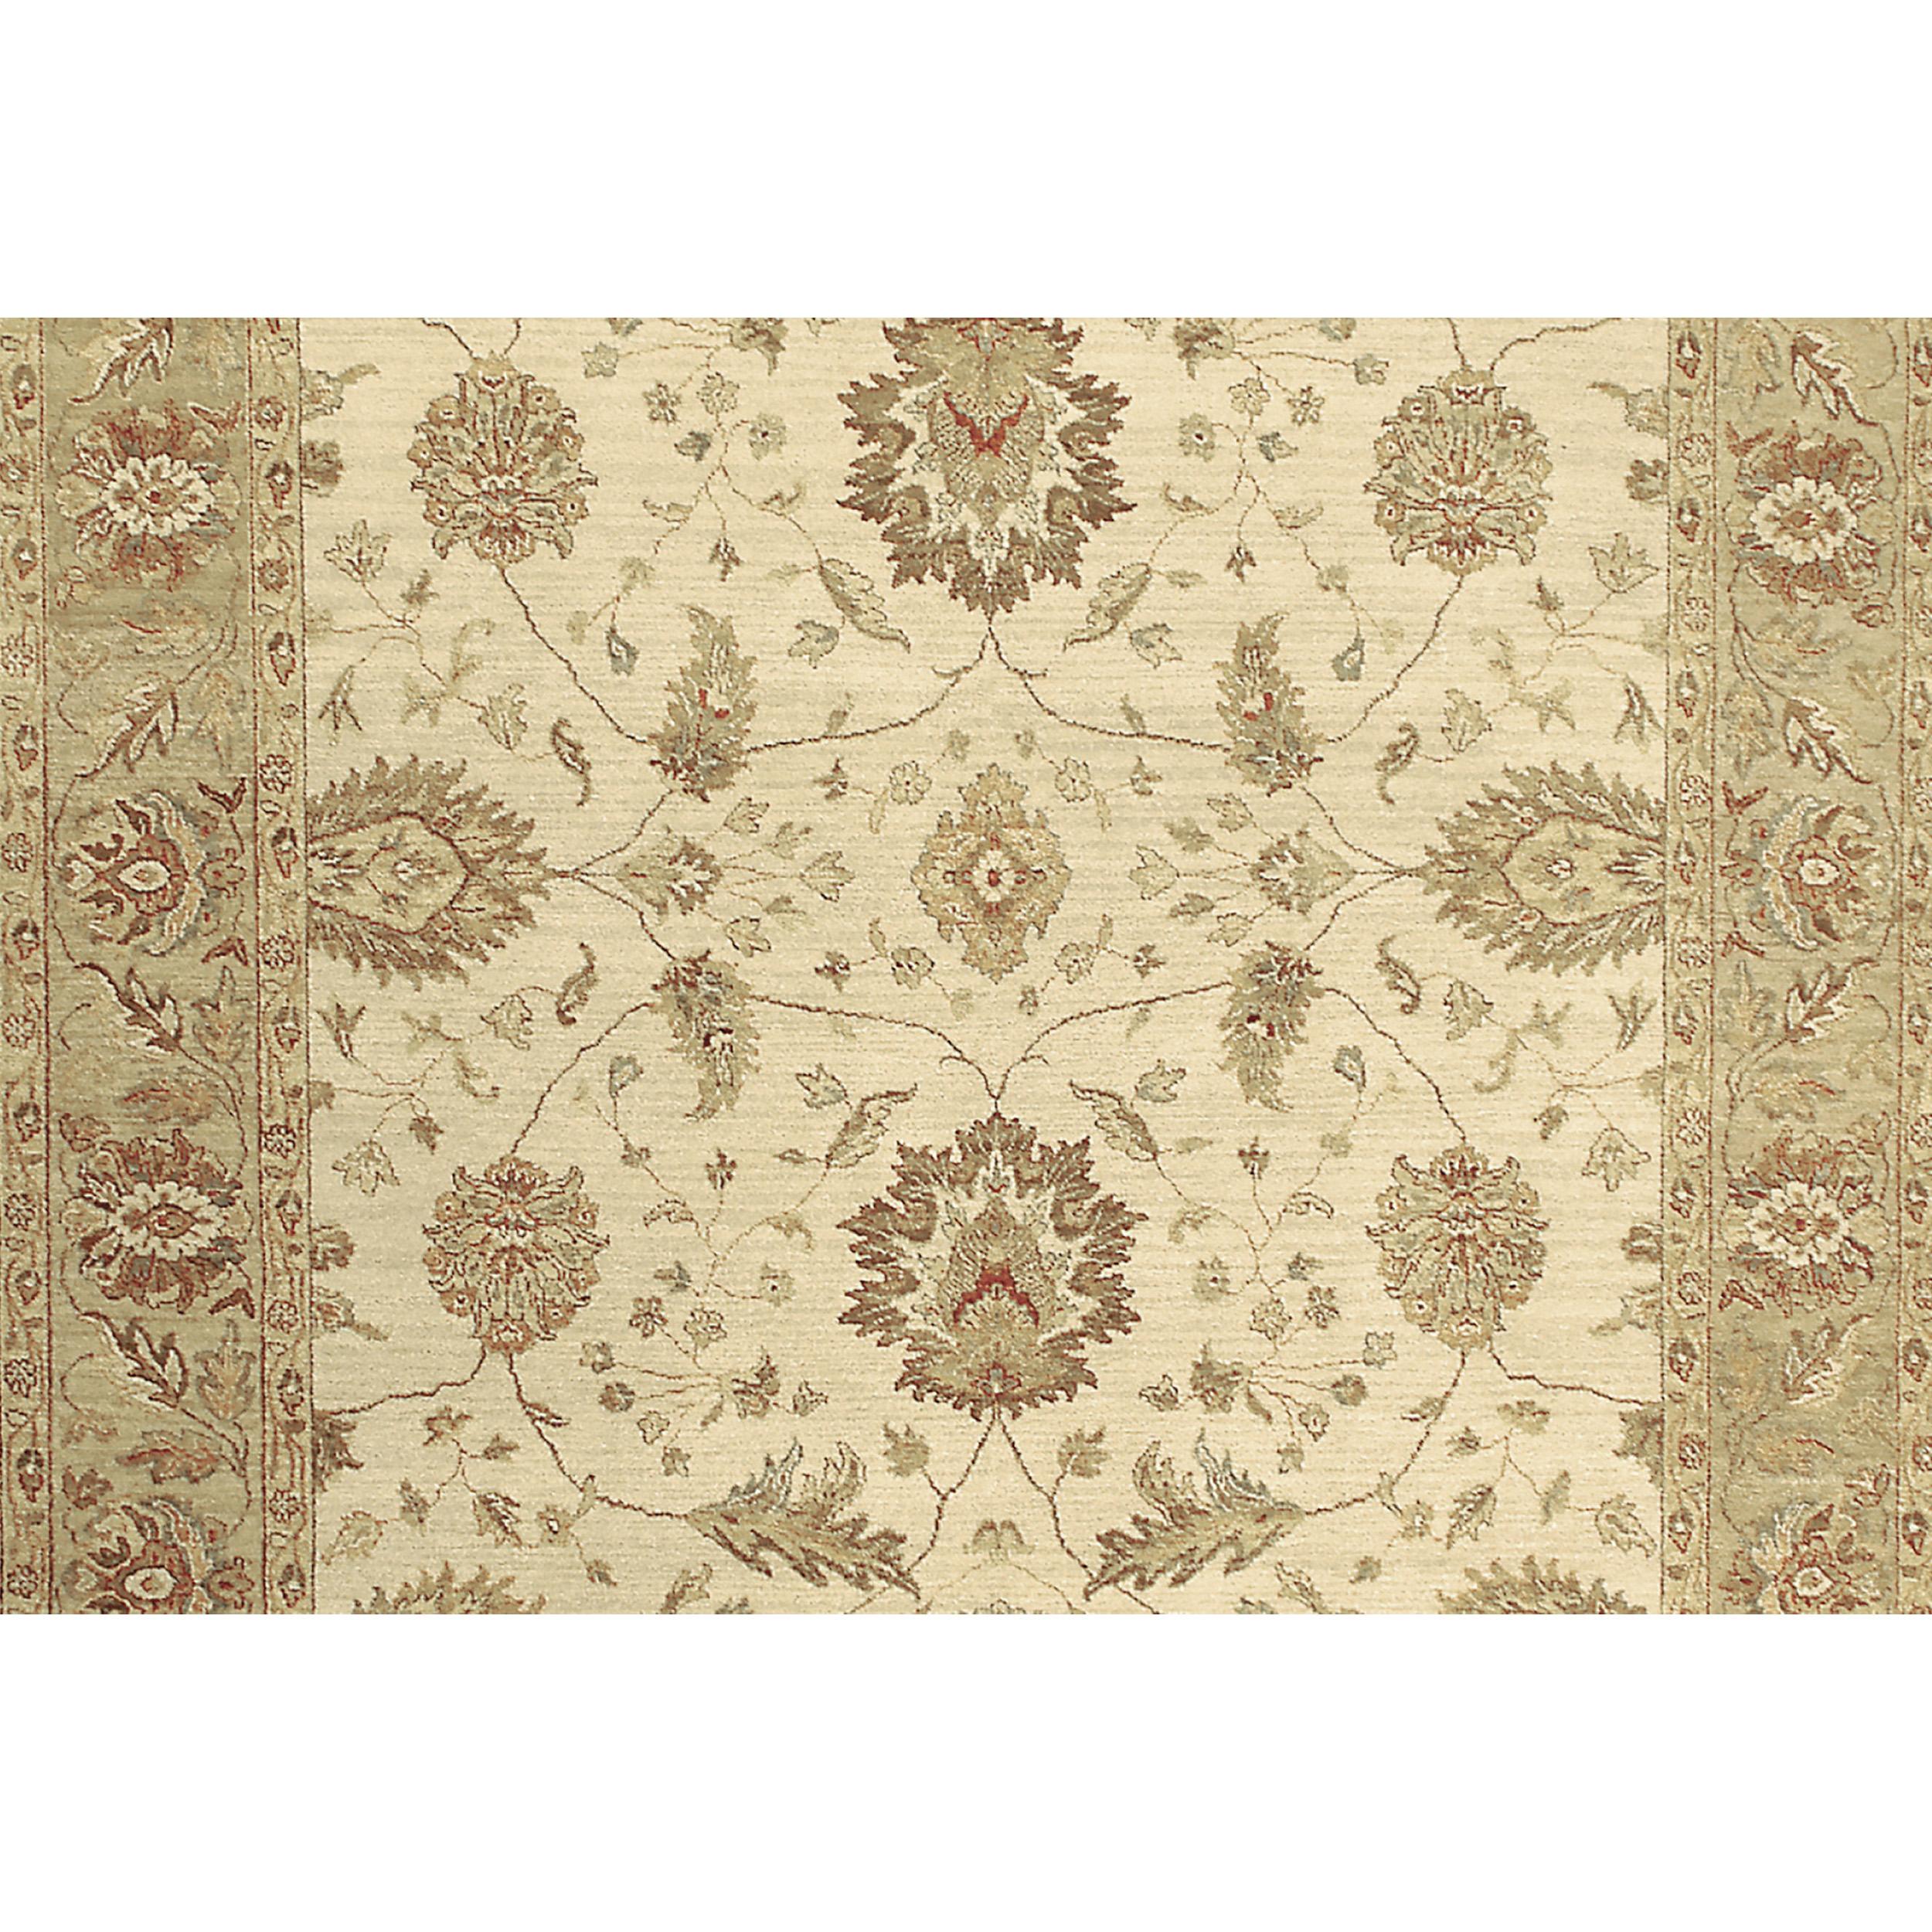 Indian Luxury Traditional Hand-Knotted Cream/Fawn 12X24 Rug For Sale